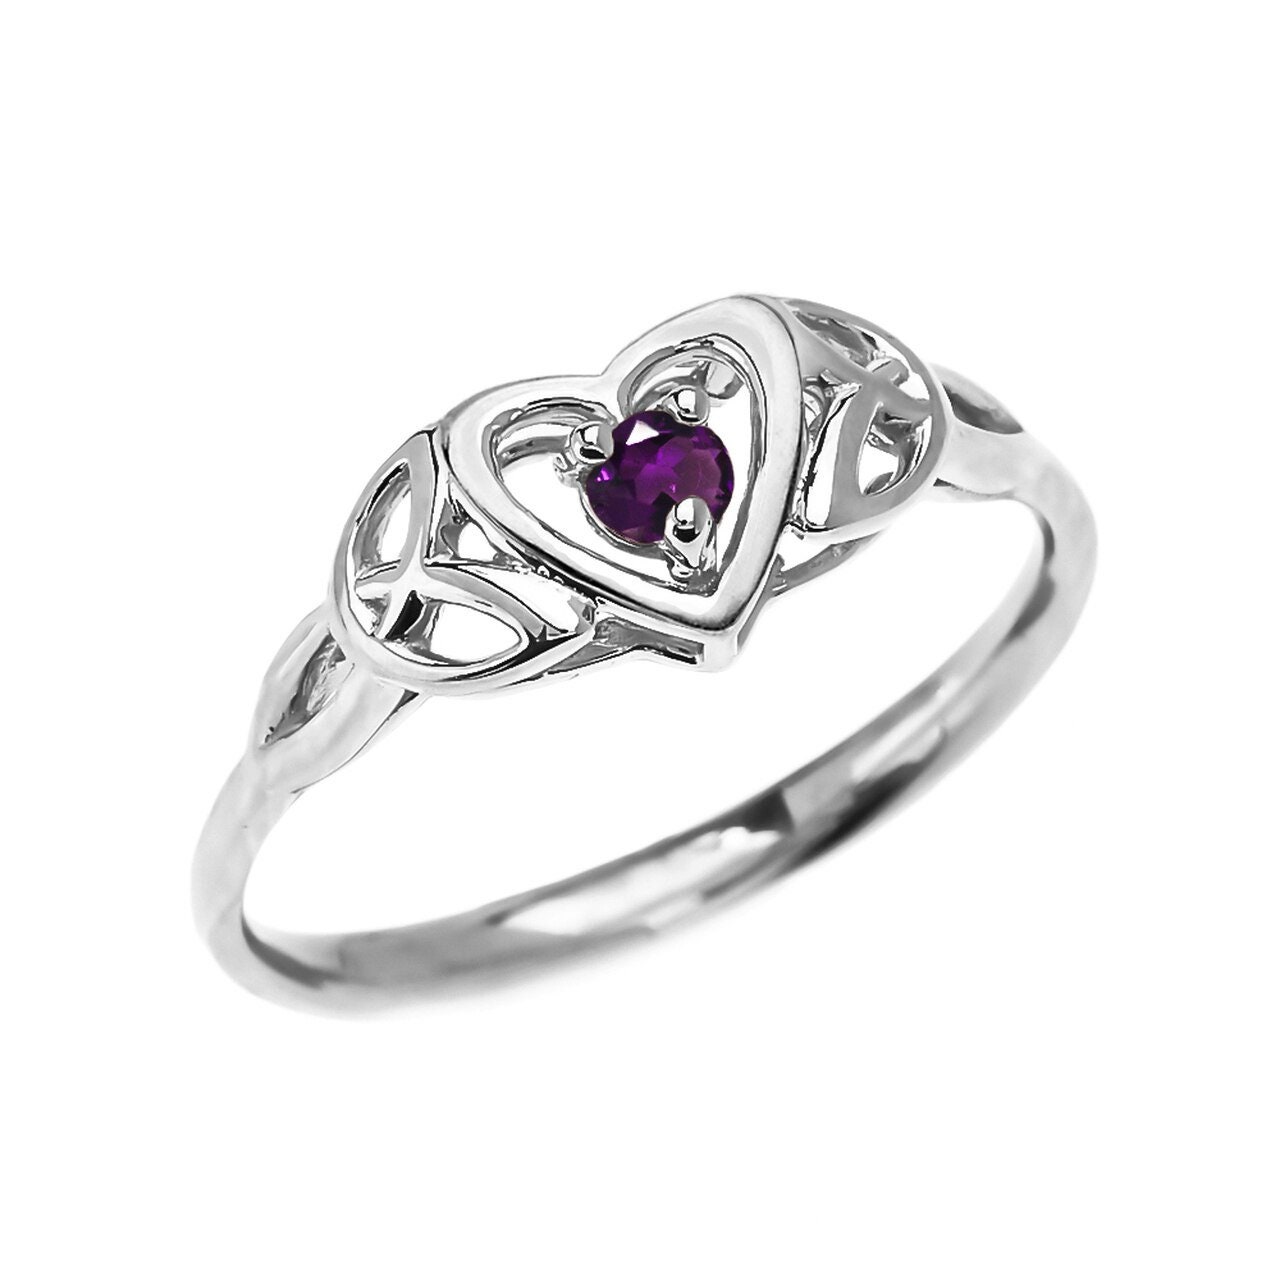 Dainty 10k White Gold Trinity Knot Heart Solitaire Diamond Engagement and Proposal Ring